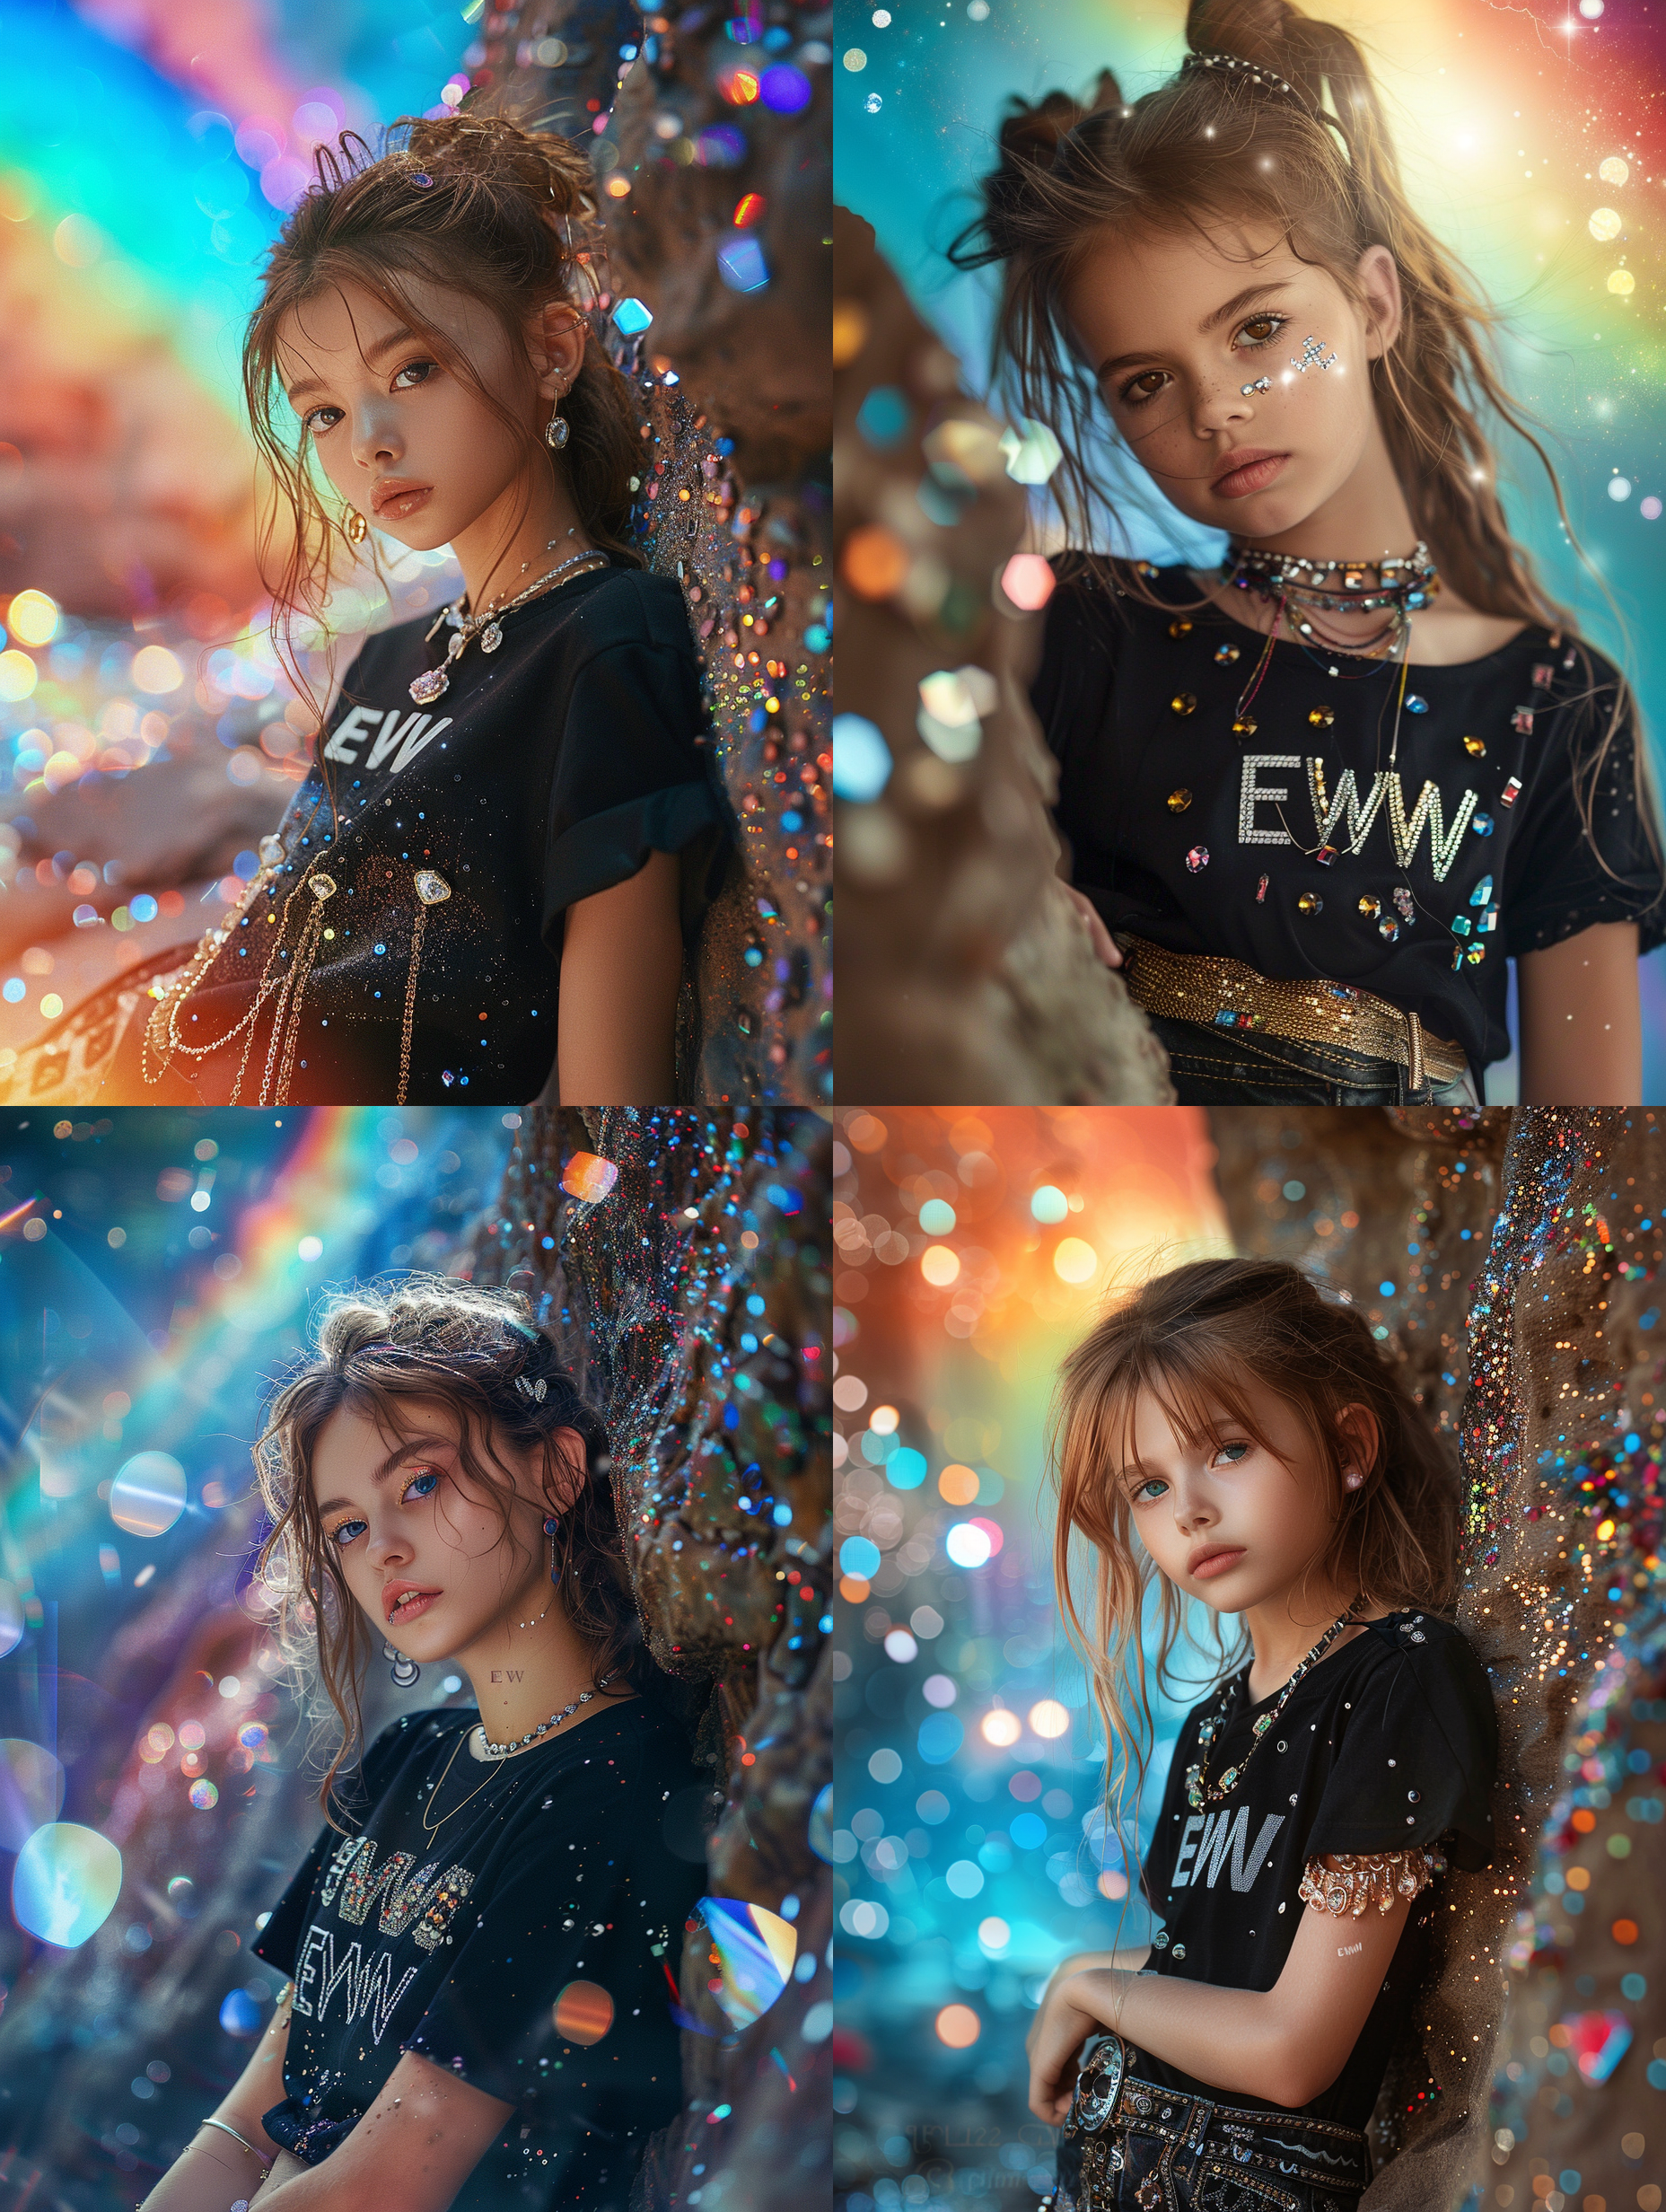 ultra wide shot, surreal photograph from a fantasy story, A cute girl leaning against a rock, dreamy look,  she has a black shirt with the inscription "EWW" and shiny gems and wears a lot of jewelry, Everything is a fantasy atmosphere, in the background are a rainbow and surreal elements with gems, glitter and diamonds, vermillion and blue, bright light, --stylize 250 --style raw --v 6
